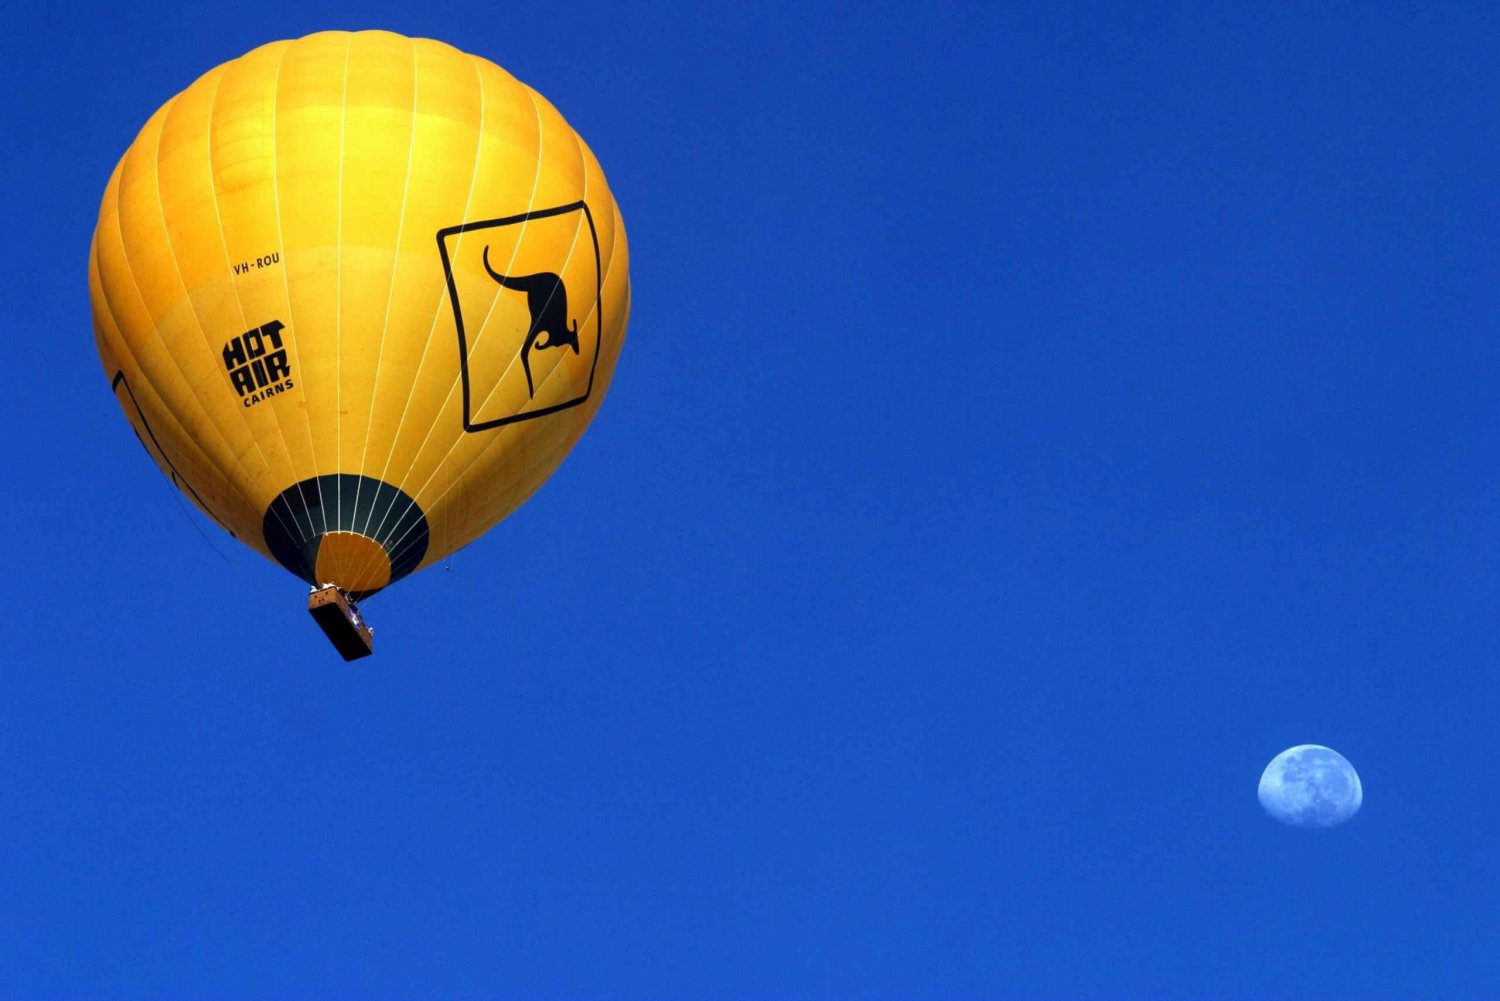 Cairns: Hot Air Balloon Flight with Transfers